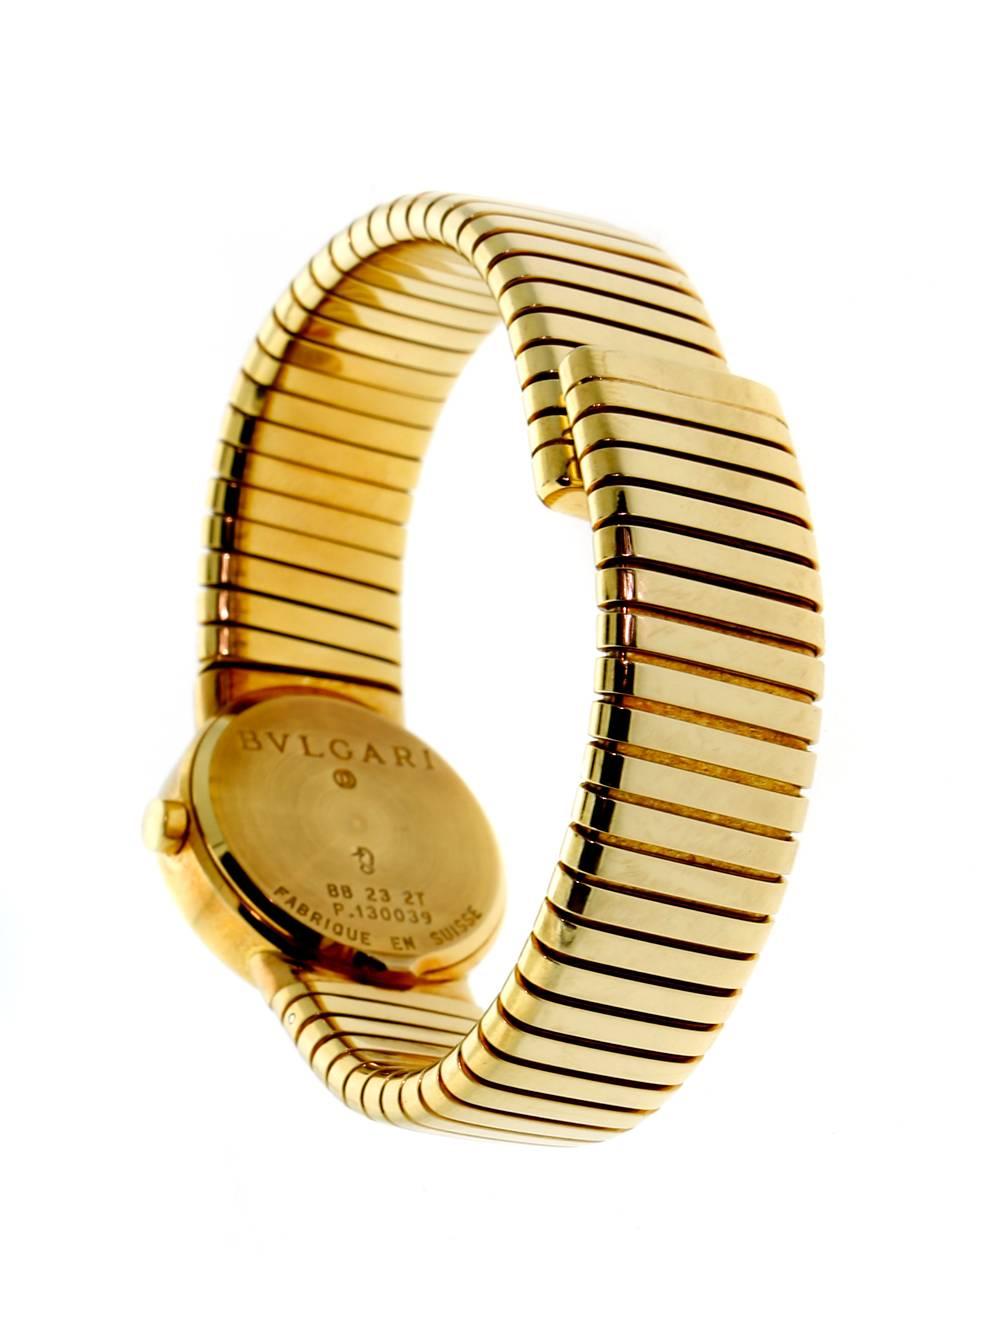 This Bvlgari Tubogas model is finely crafted from solid 18k yellow gold. The black dial features gold stick hands and hour markers with Arabic numerals at twelve and six o’clock, the watch has not been polished and is showing lovely patina!

The